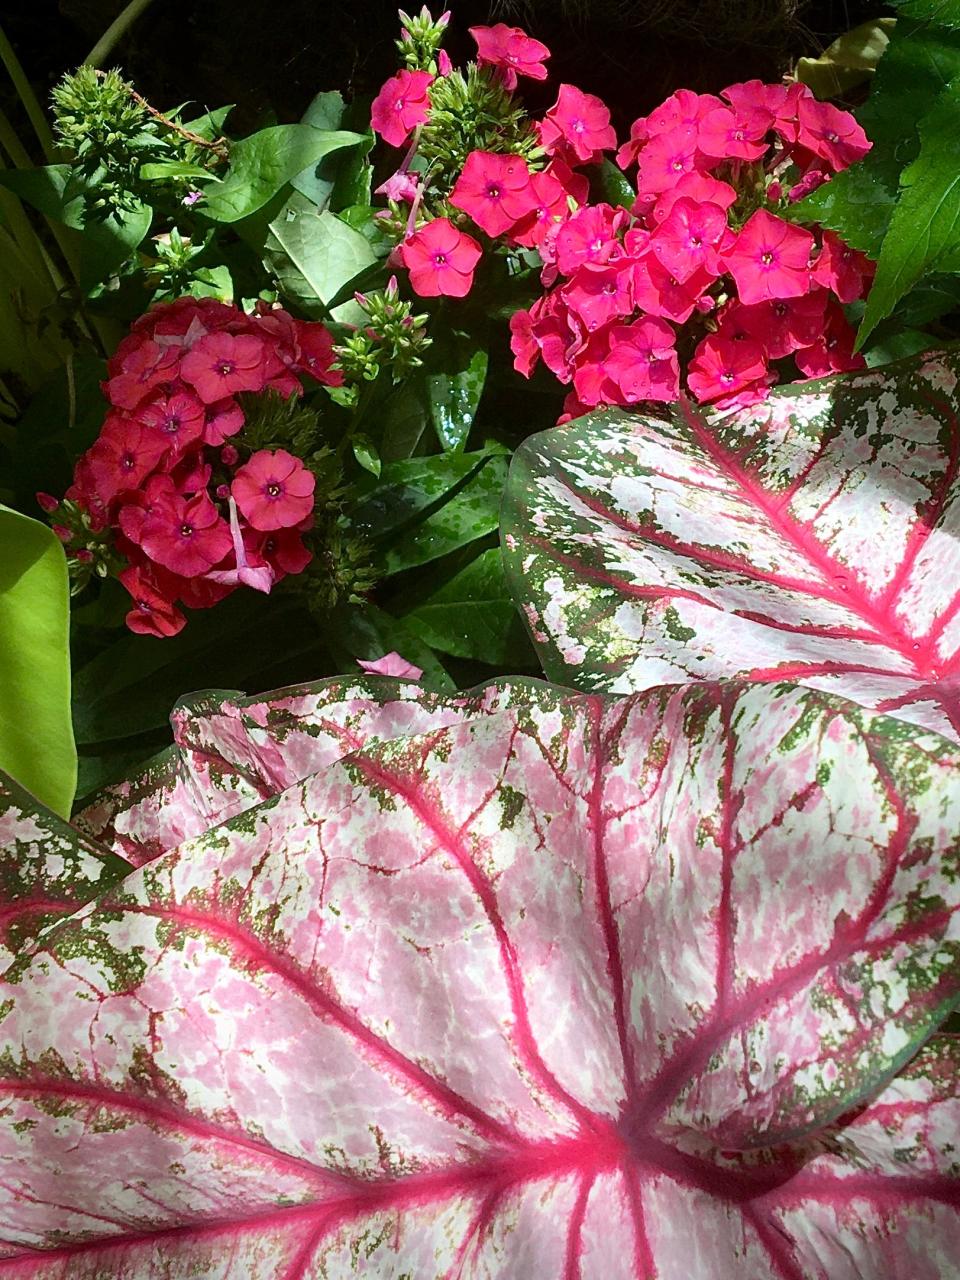 The end of June shows Heart to Heart Bottle leaves are huge giving a hand painted look echoing the color of Luminary Sunset Coral tall garden Phlox.